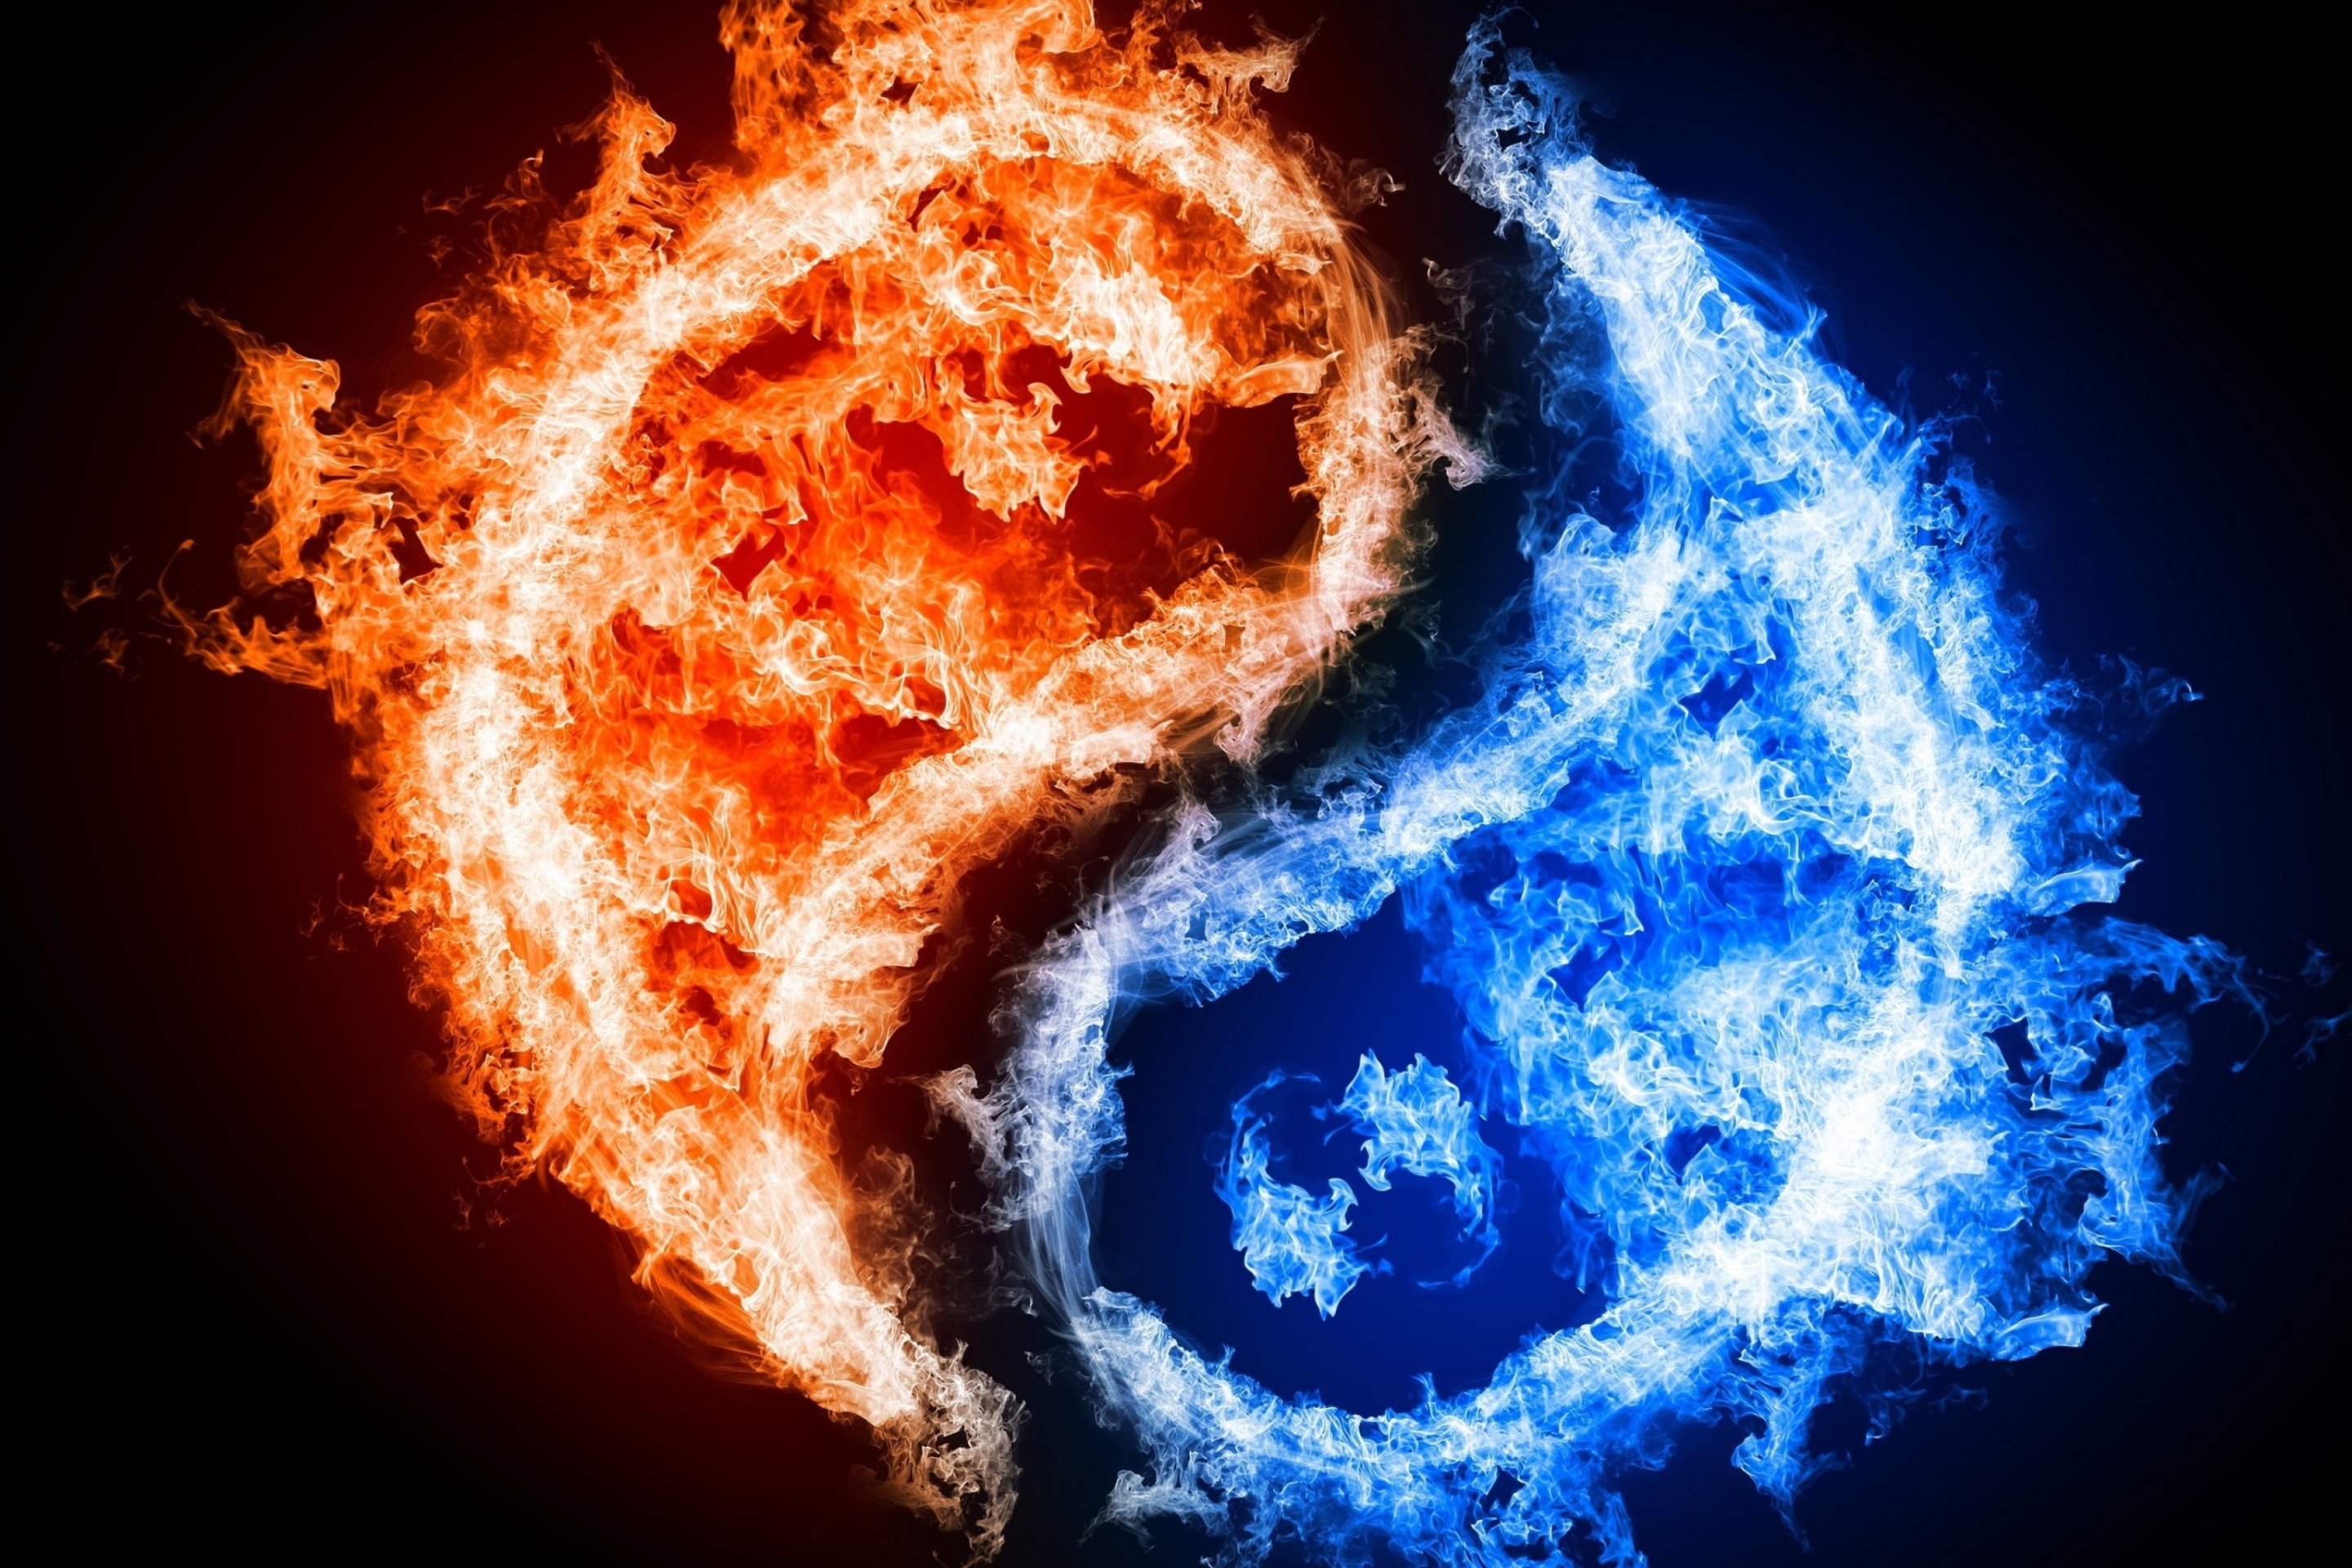 Yin and yang, fire and water wallpaper 2880x1920